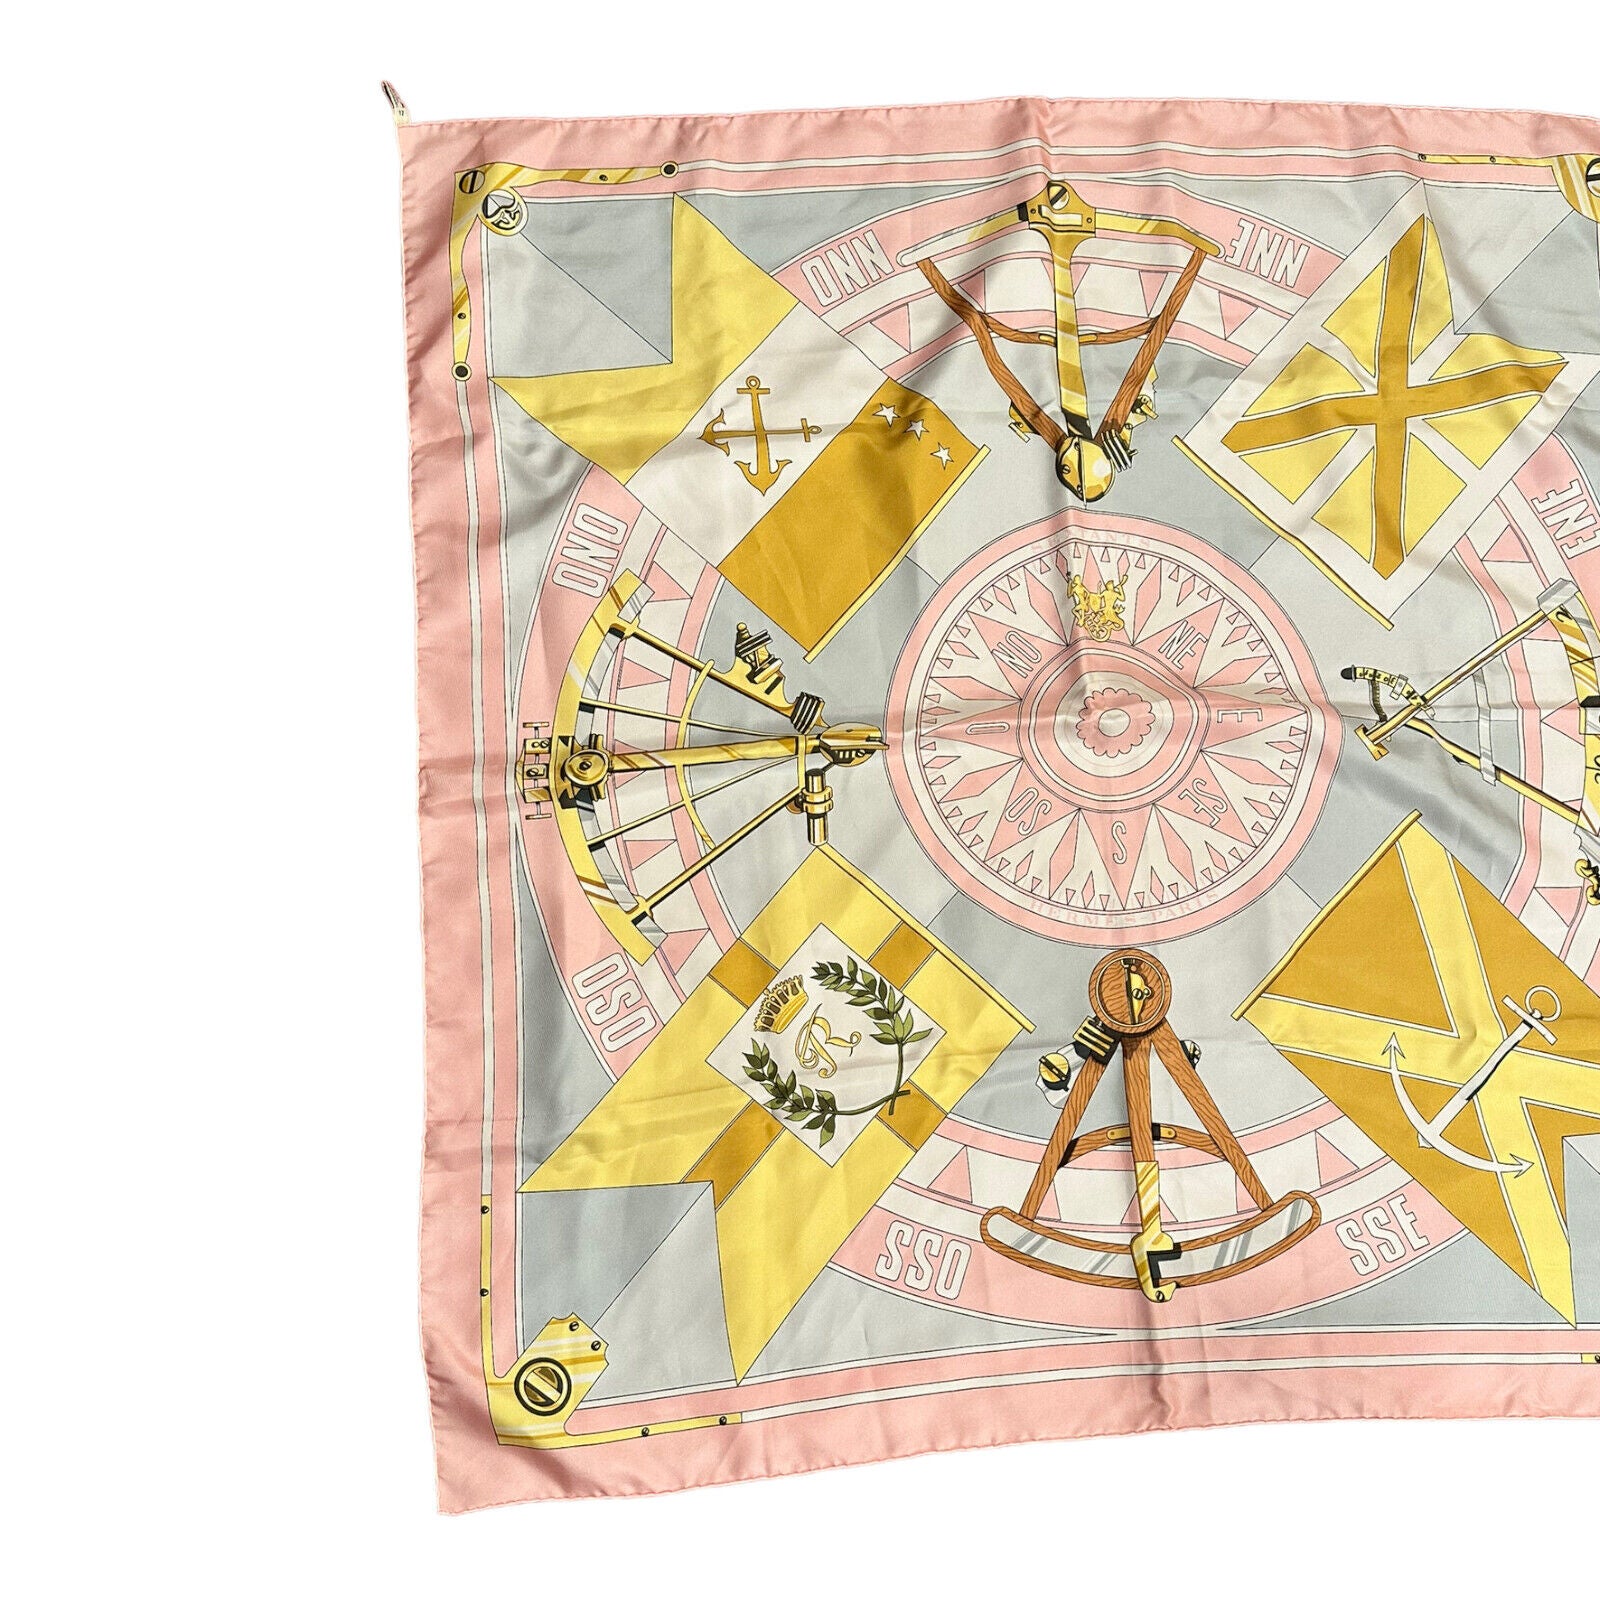 5 TOP TIPS - HOW TO AUTHENTICATE HERMES SILK SCARF 